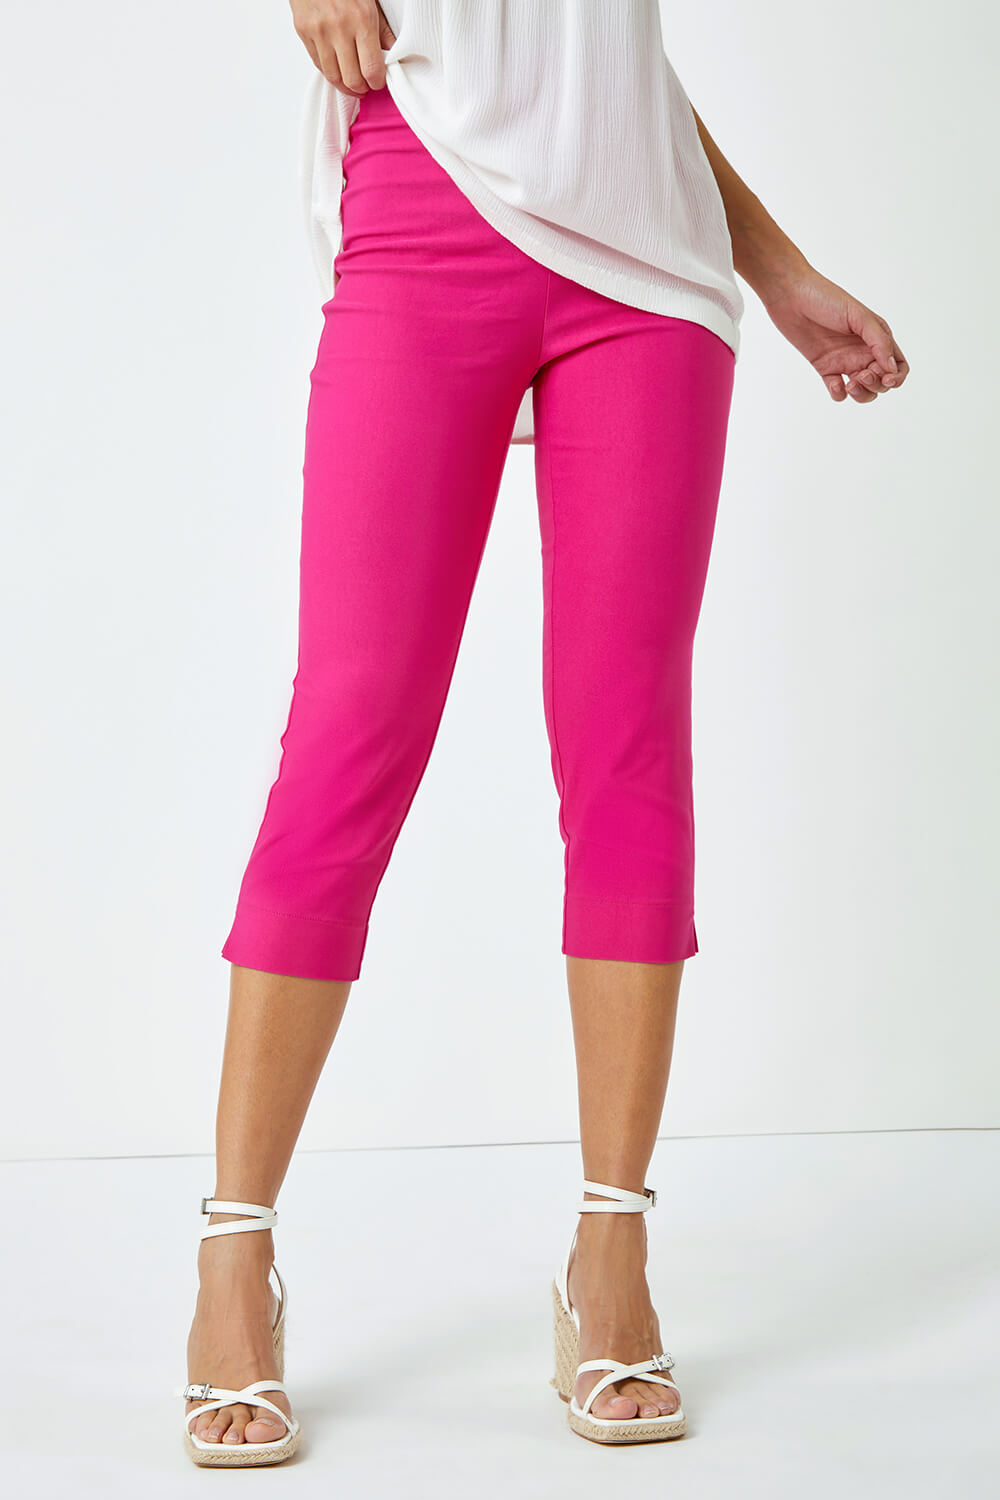 PINK Cropped Stretch Trousers, Image 3 of 5